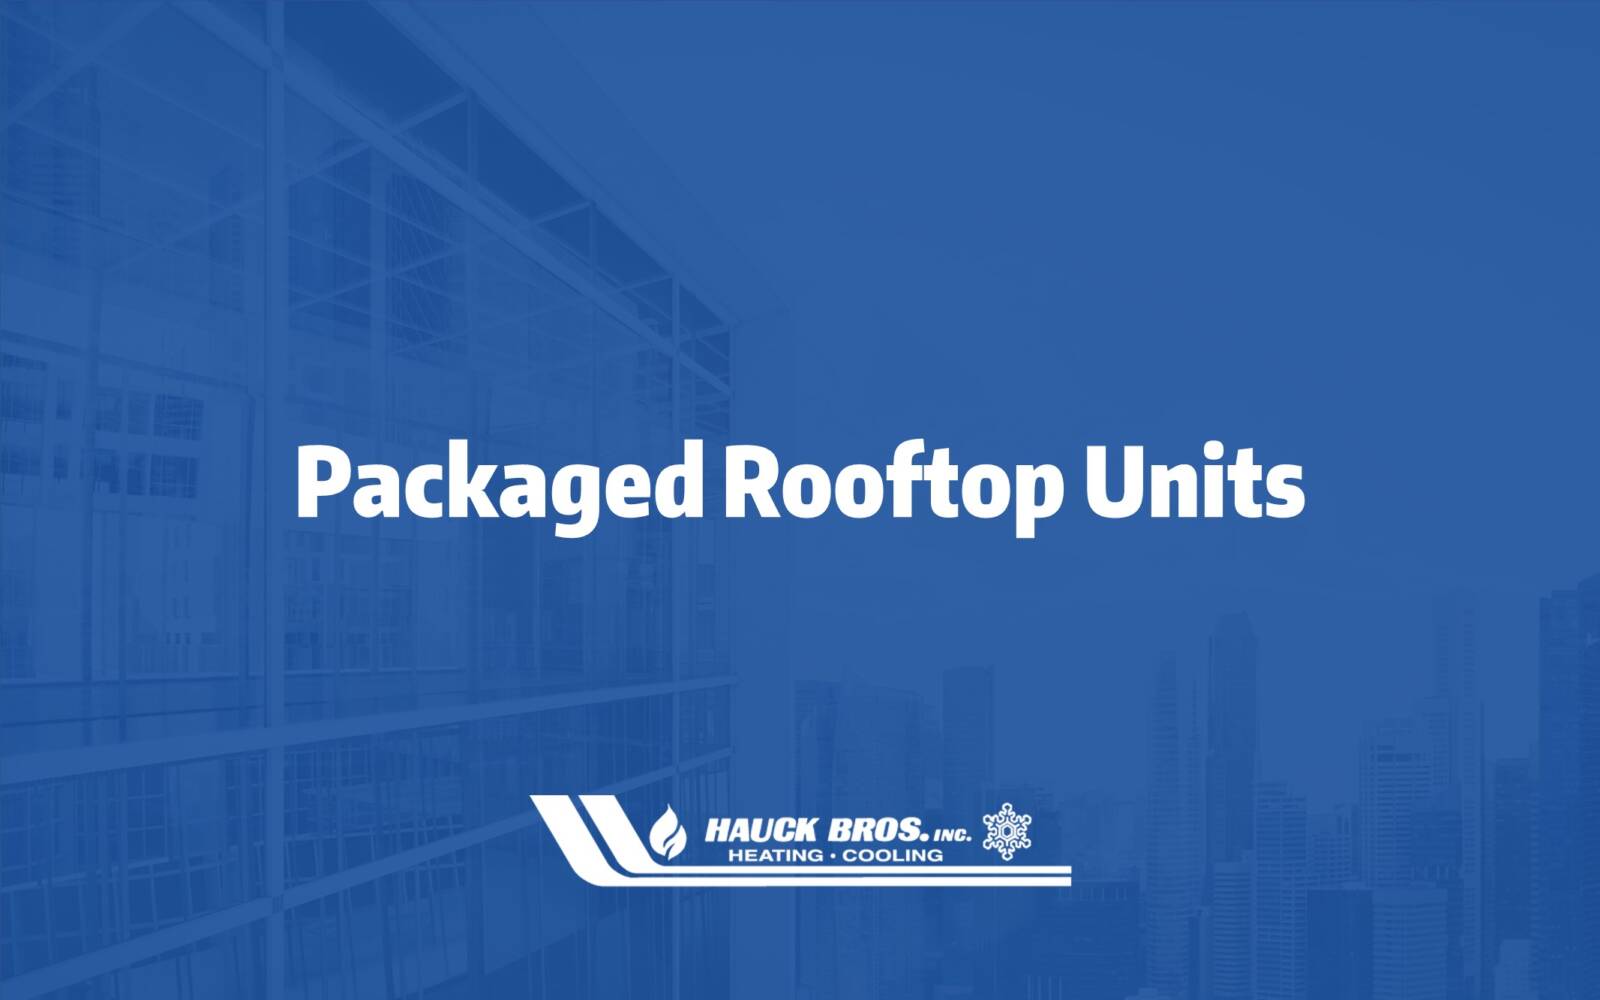 Packaged Rooftop Units